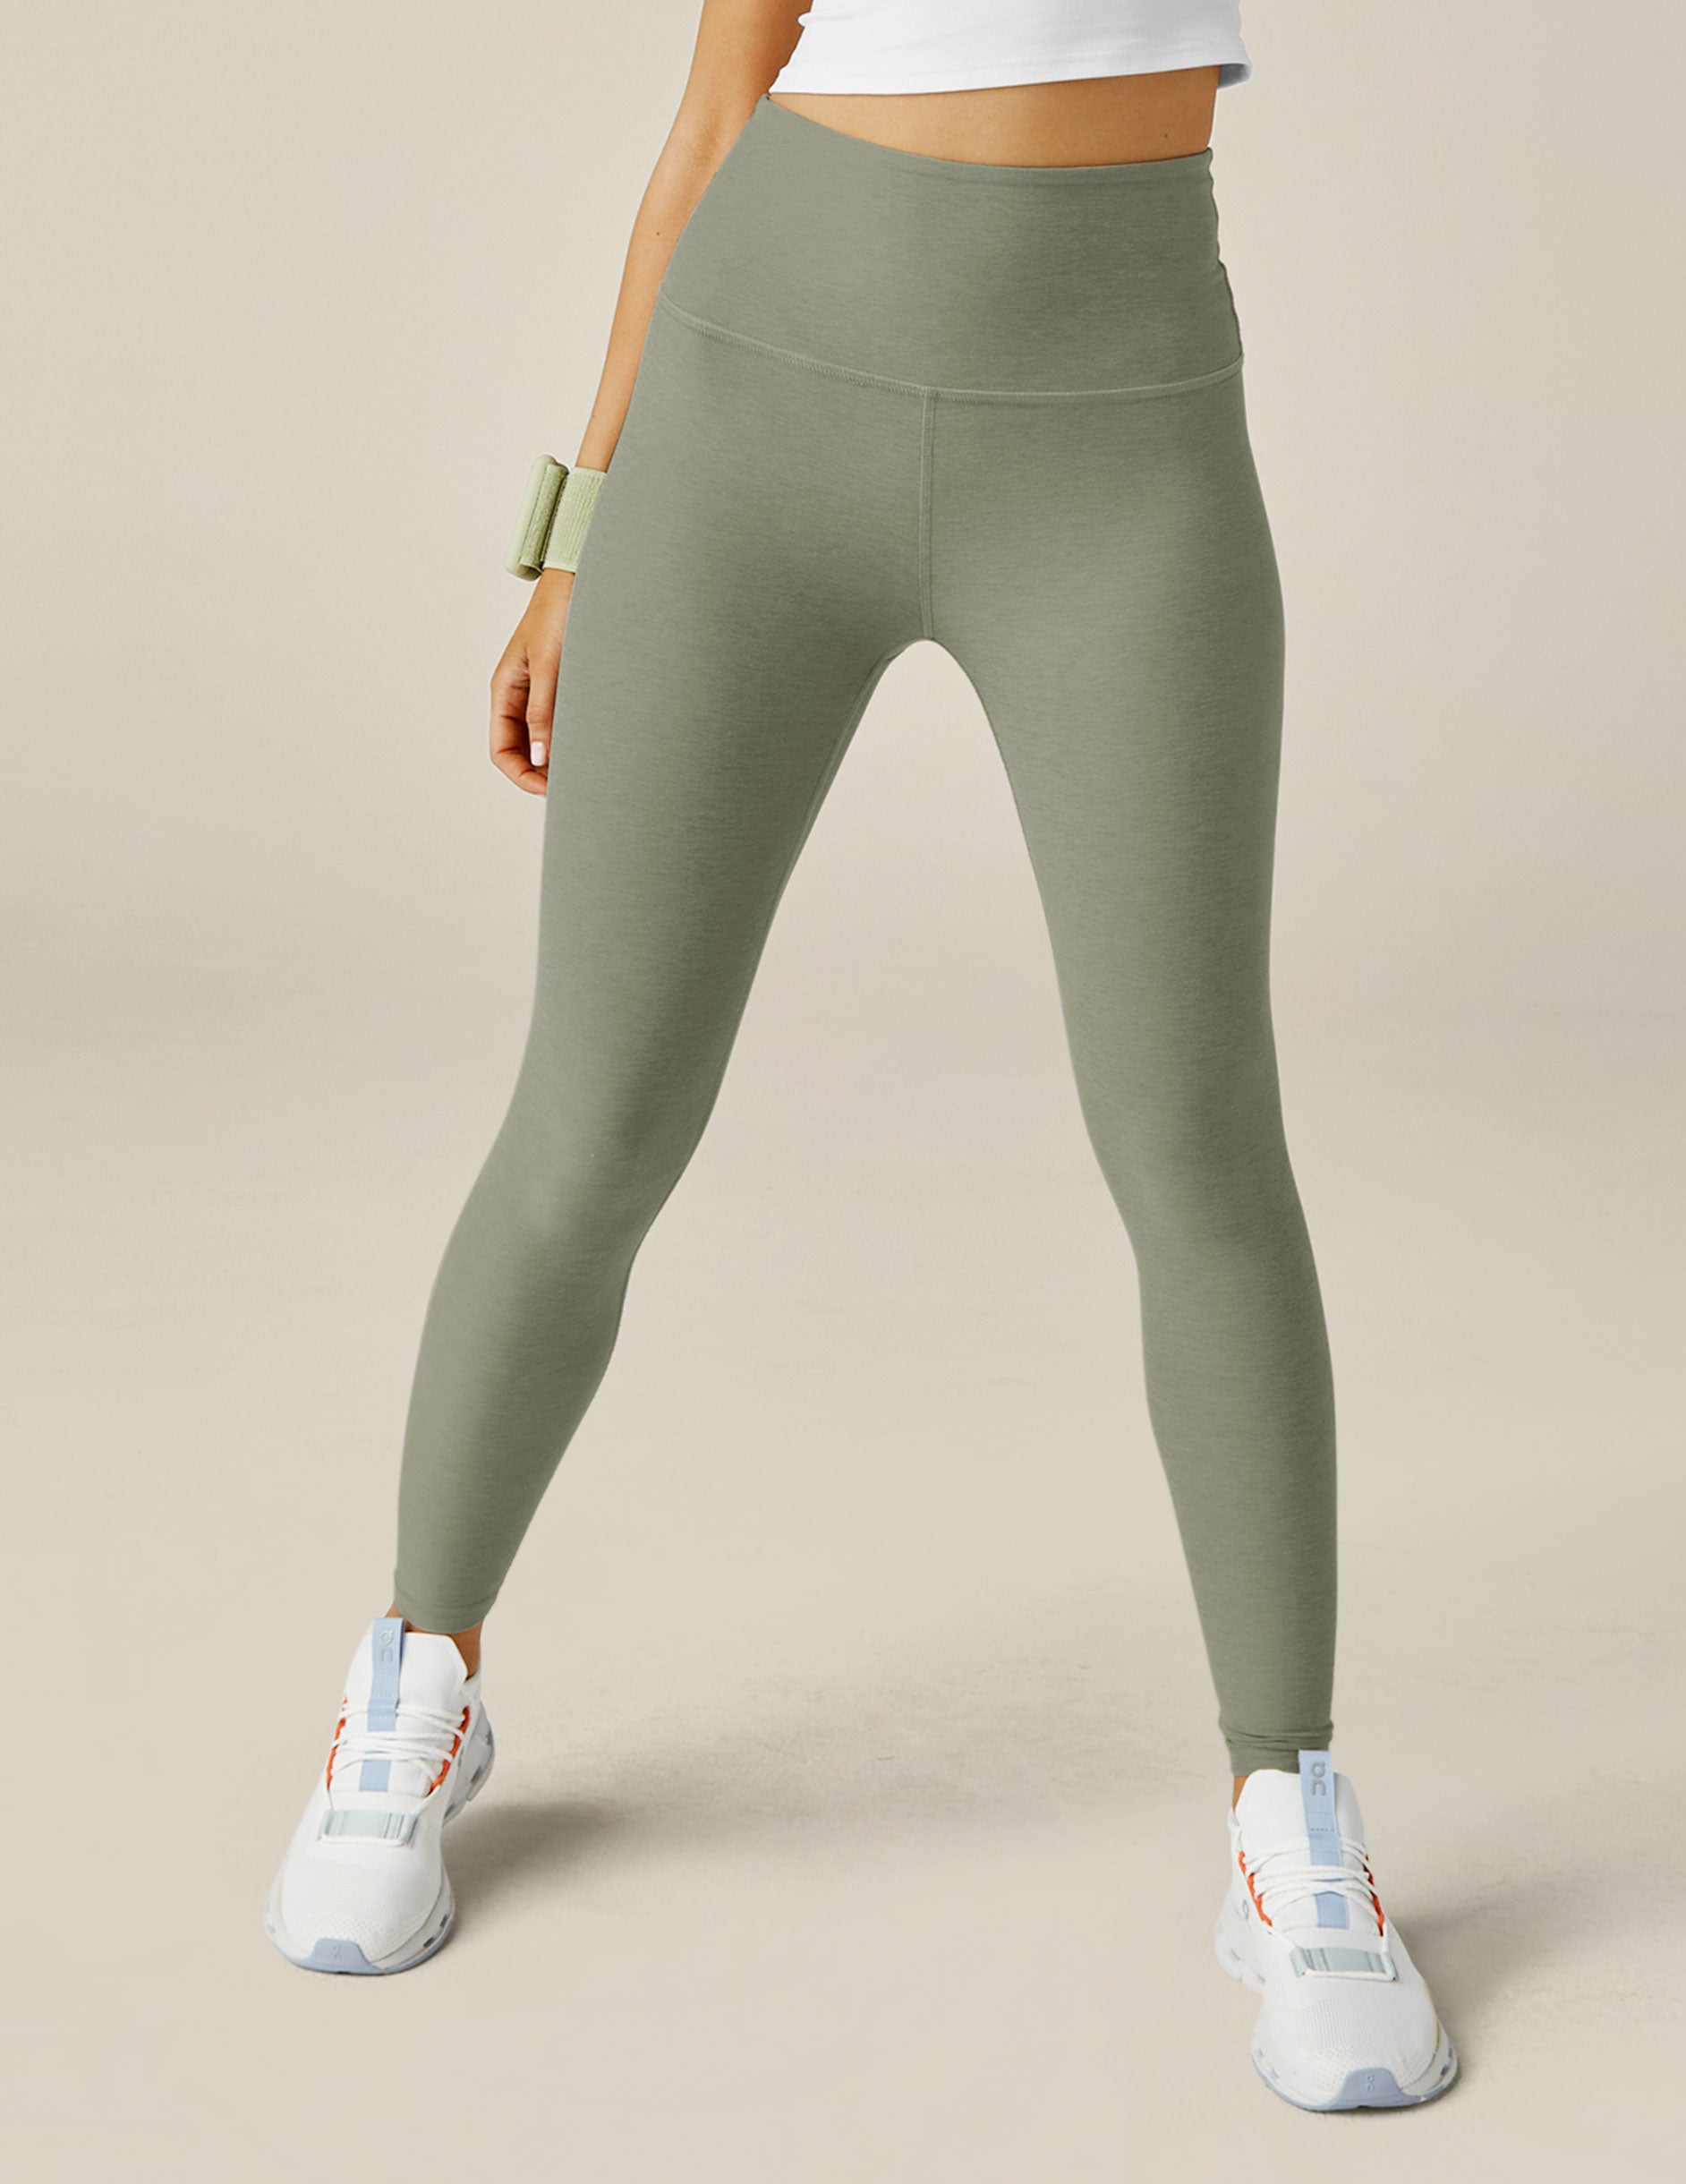 Beyond Yoga Spacedye Caught in the Midi High Waisted Legging in Chai